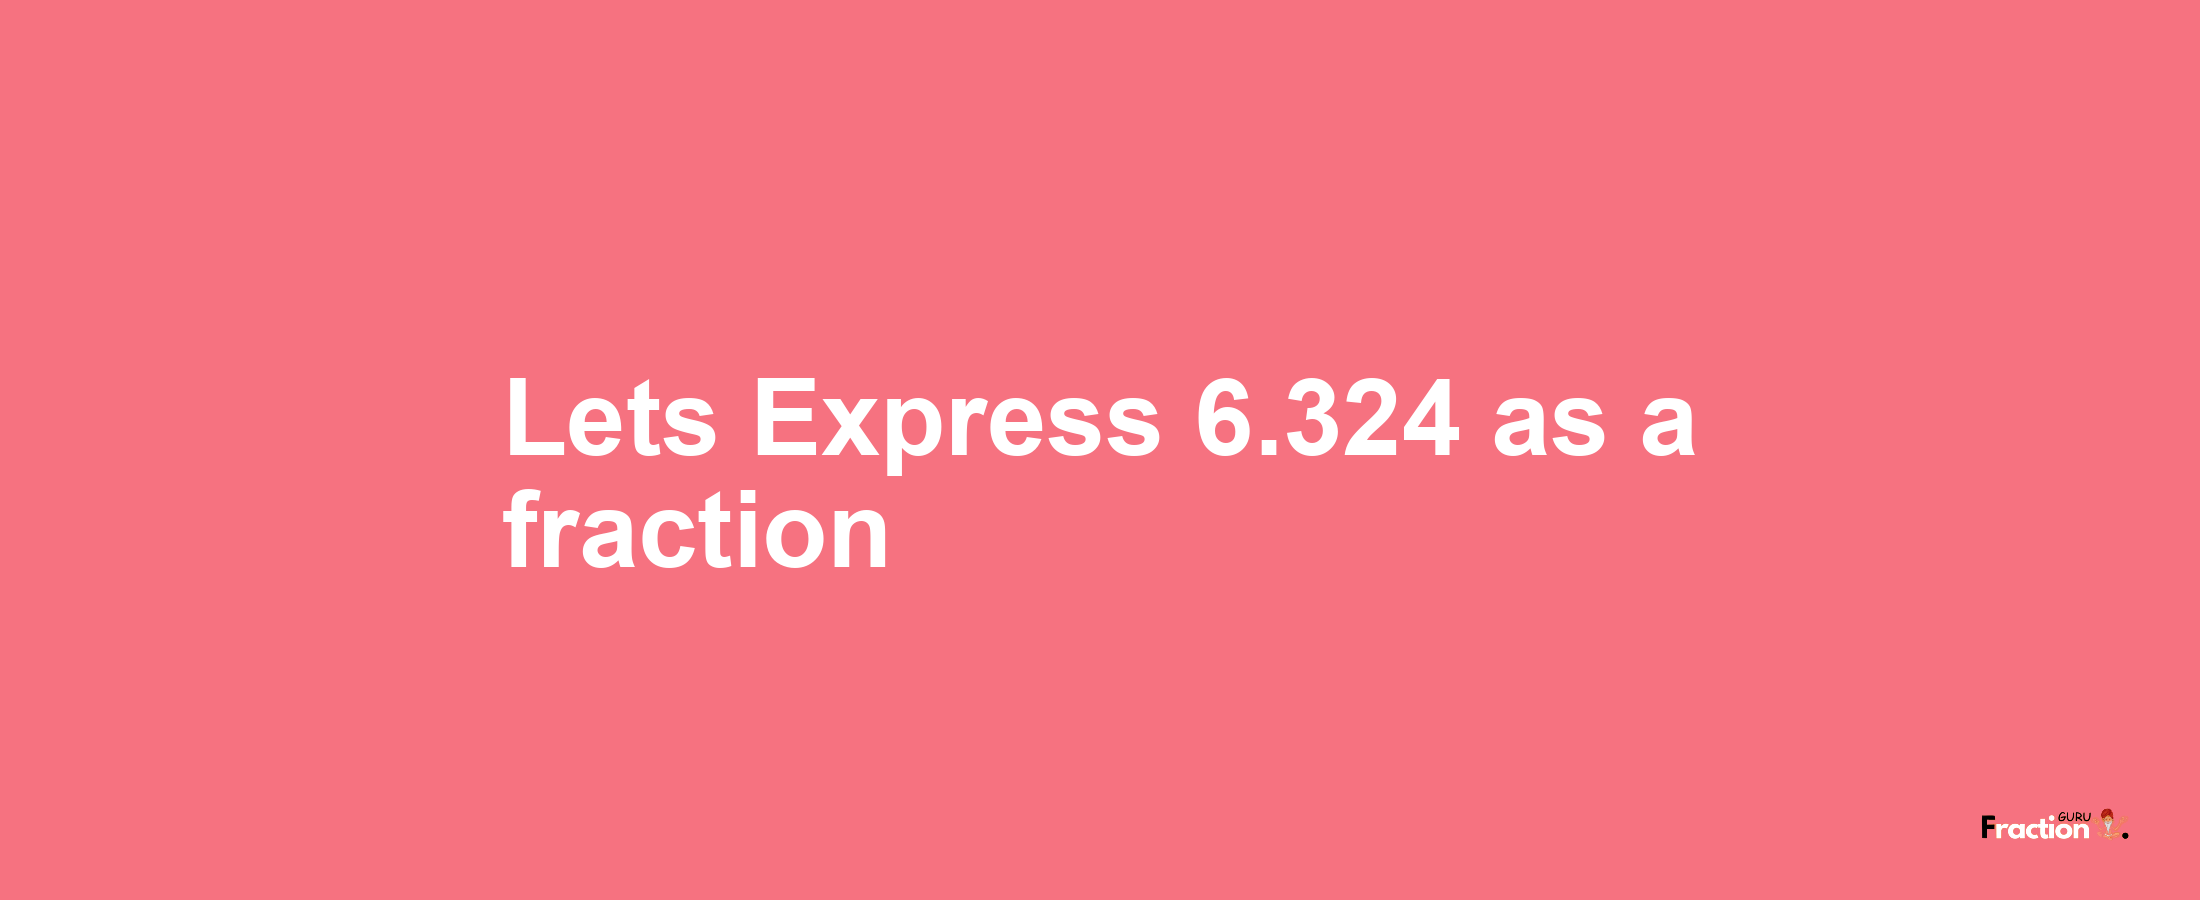 Lets Express 6.324 as afraction